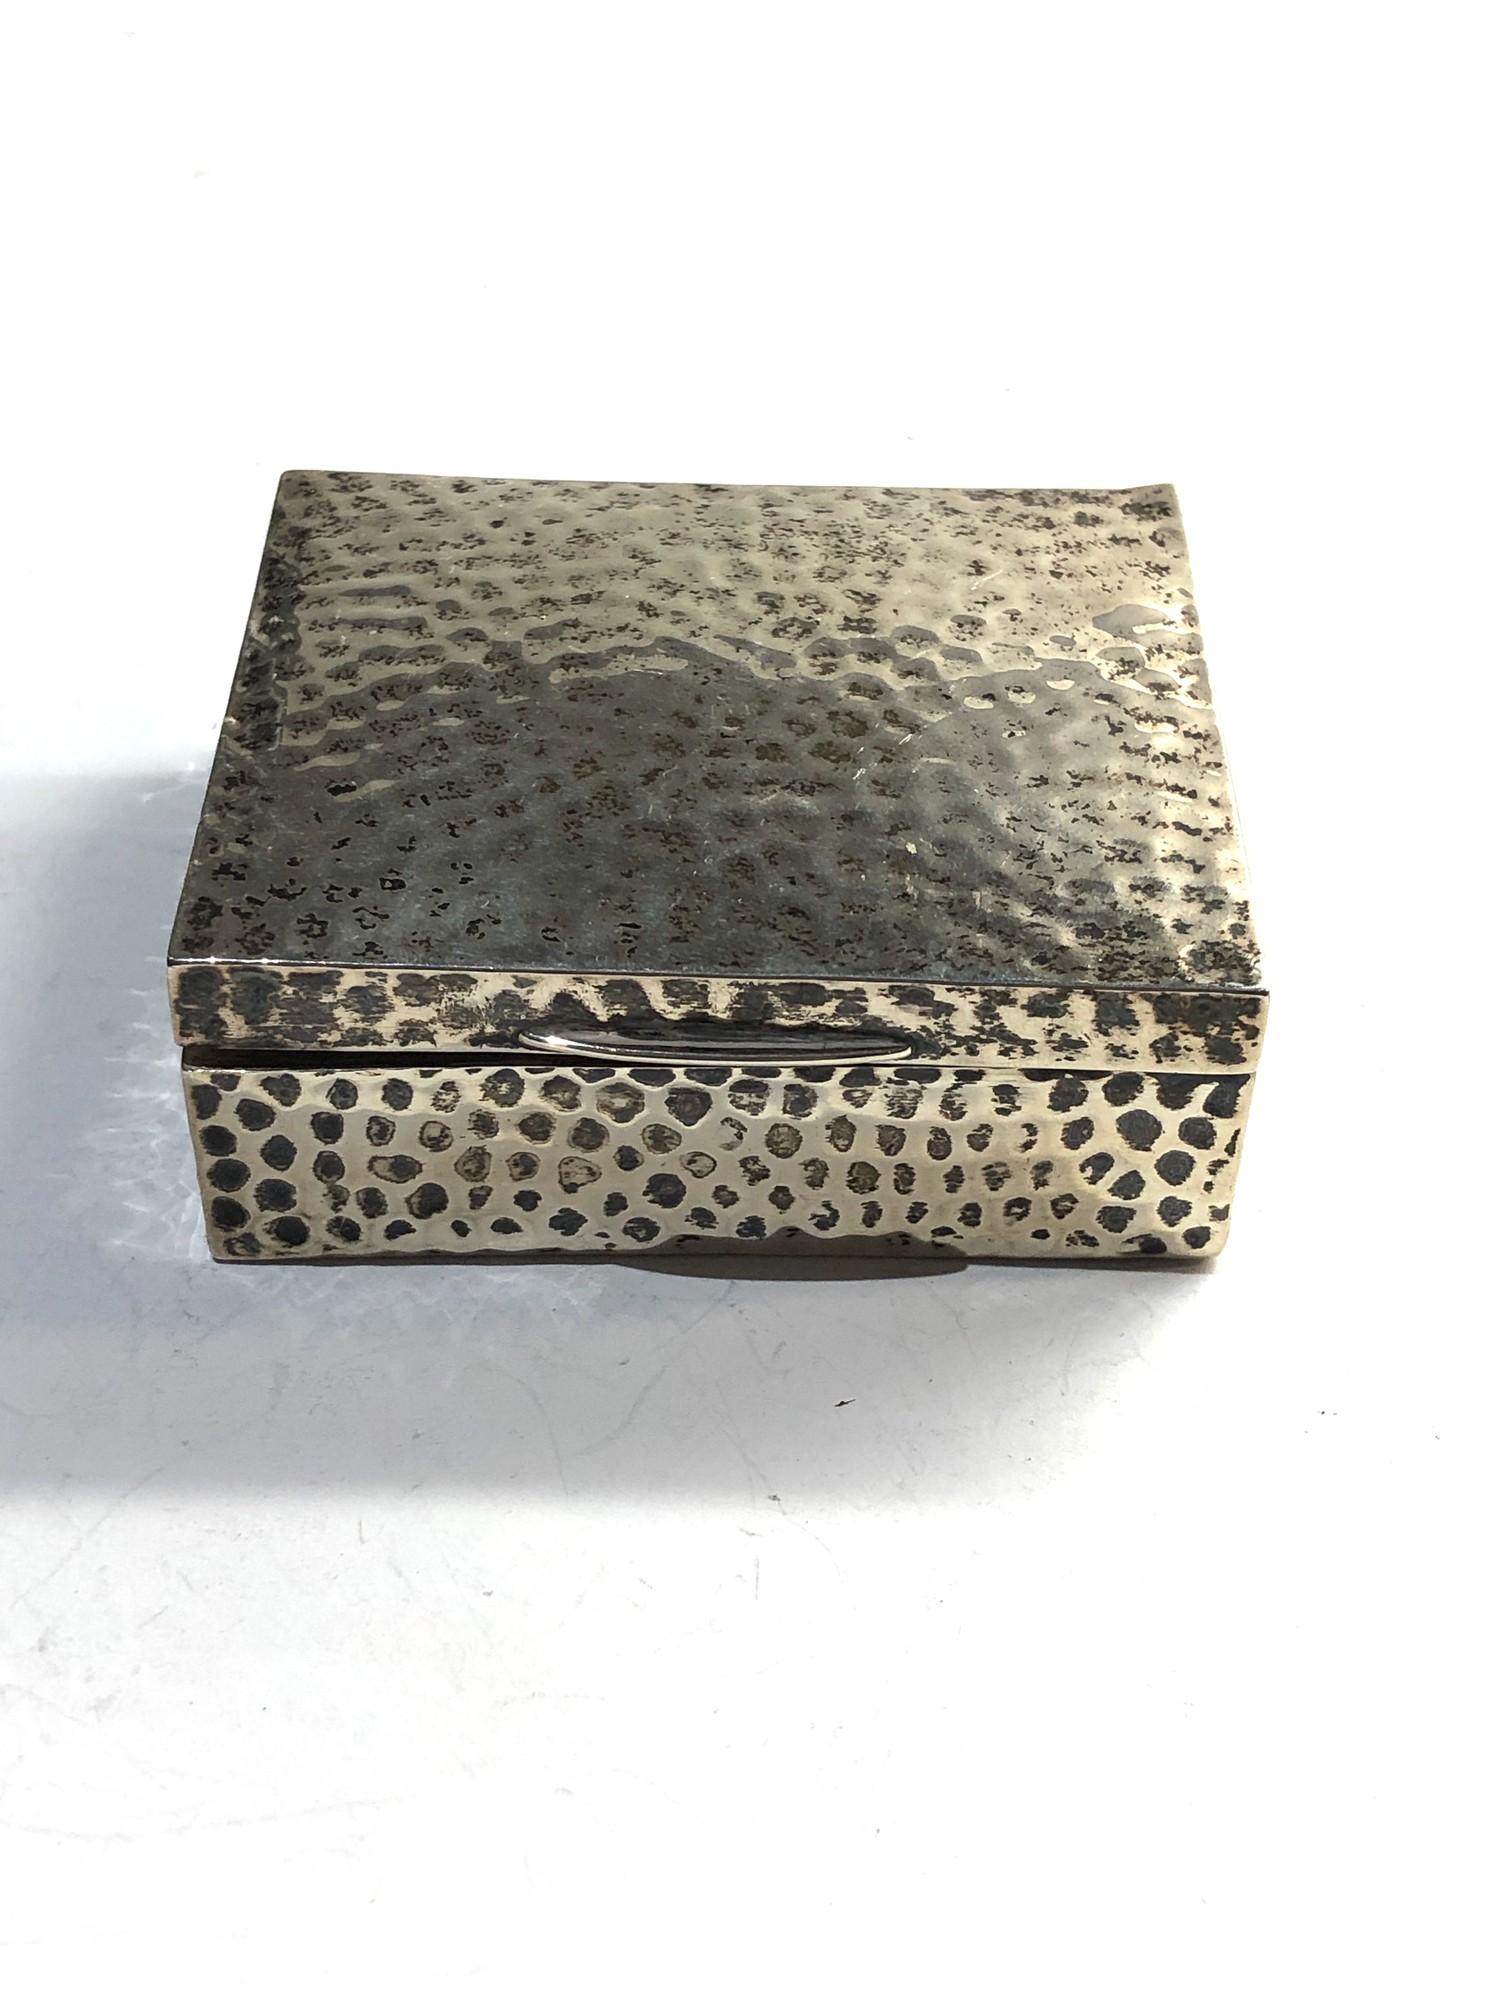 Small vintage silver cigarette box London silver hallmarks measures approx 8.5cm by 7.5cm height 3cm